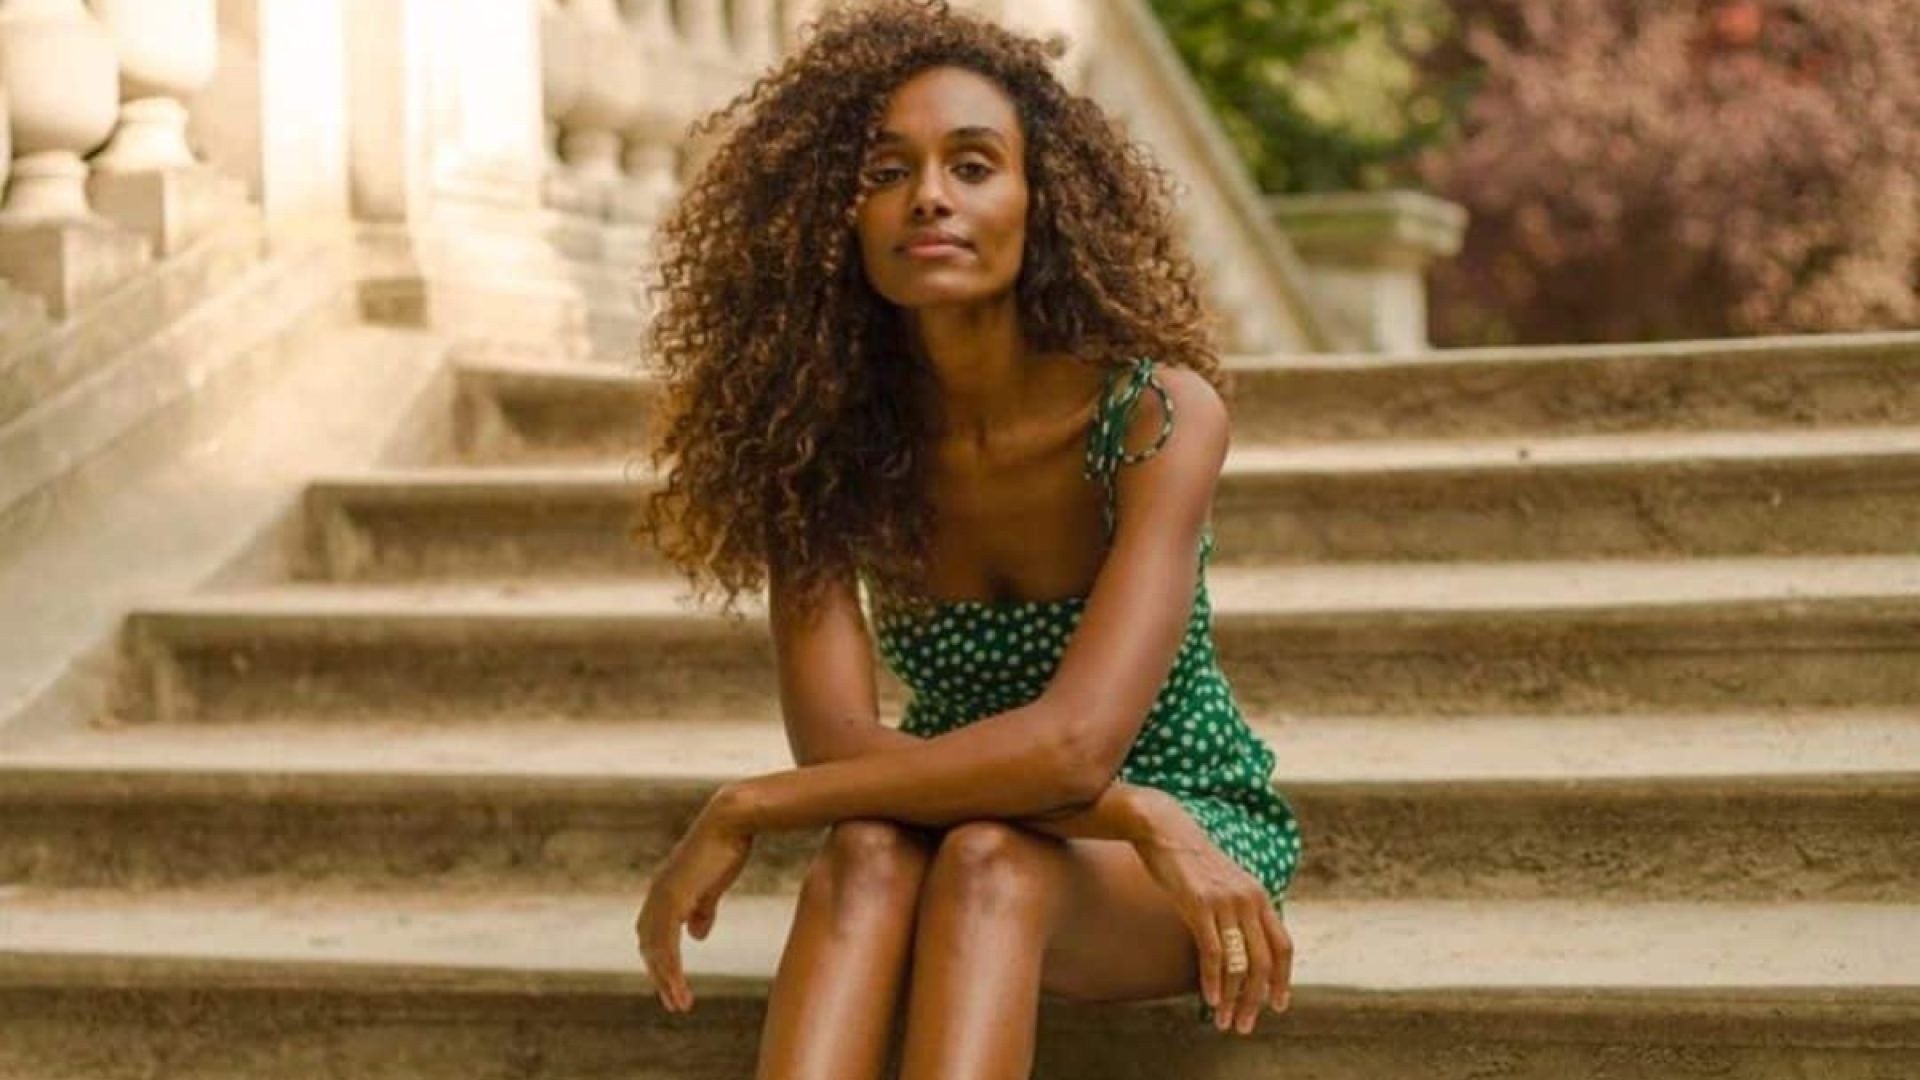 Director Gelila Bekele Aims To Inspire With Documentary, ‘Maxine’s Baby’